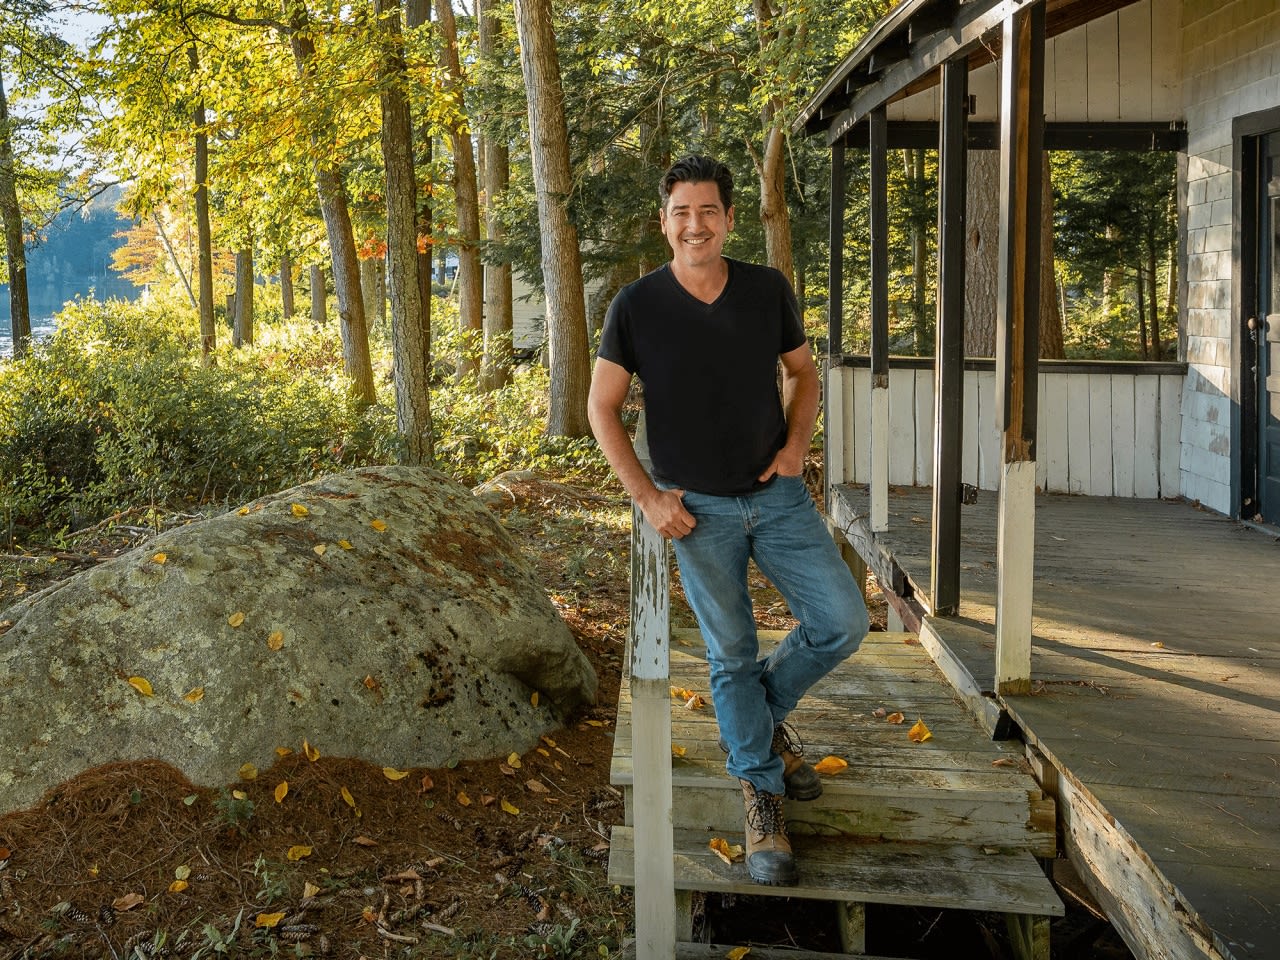 New Kids on the Block star Jonathan Knight restores abandoned campground in new HGTV spinoff